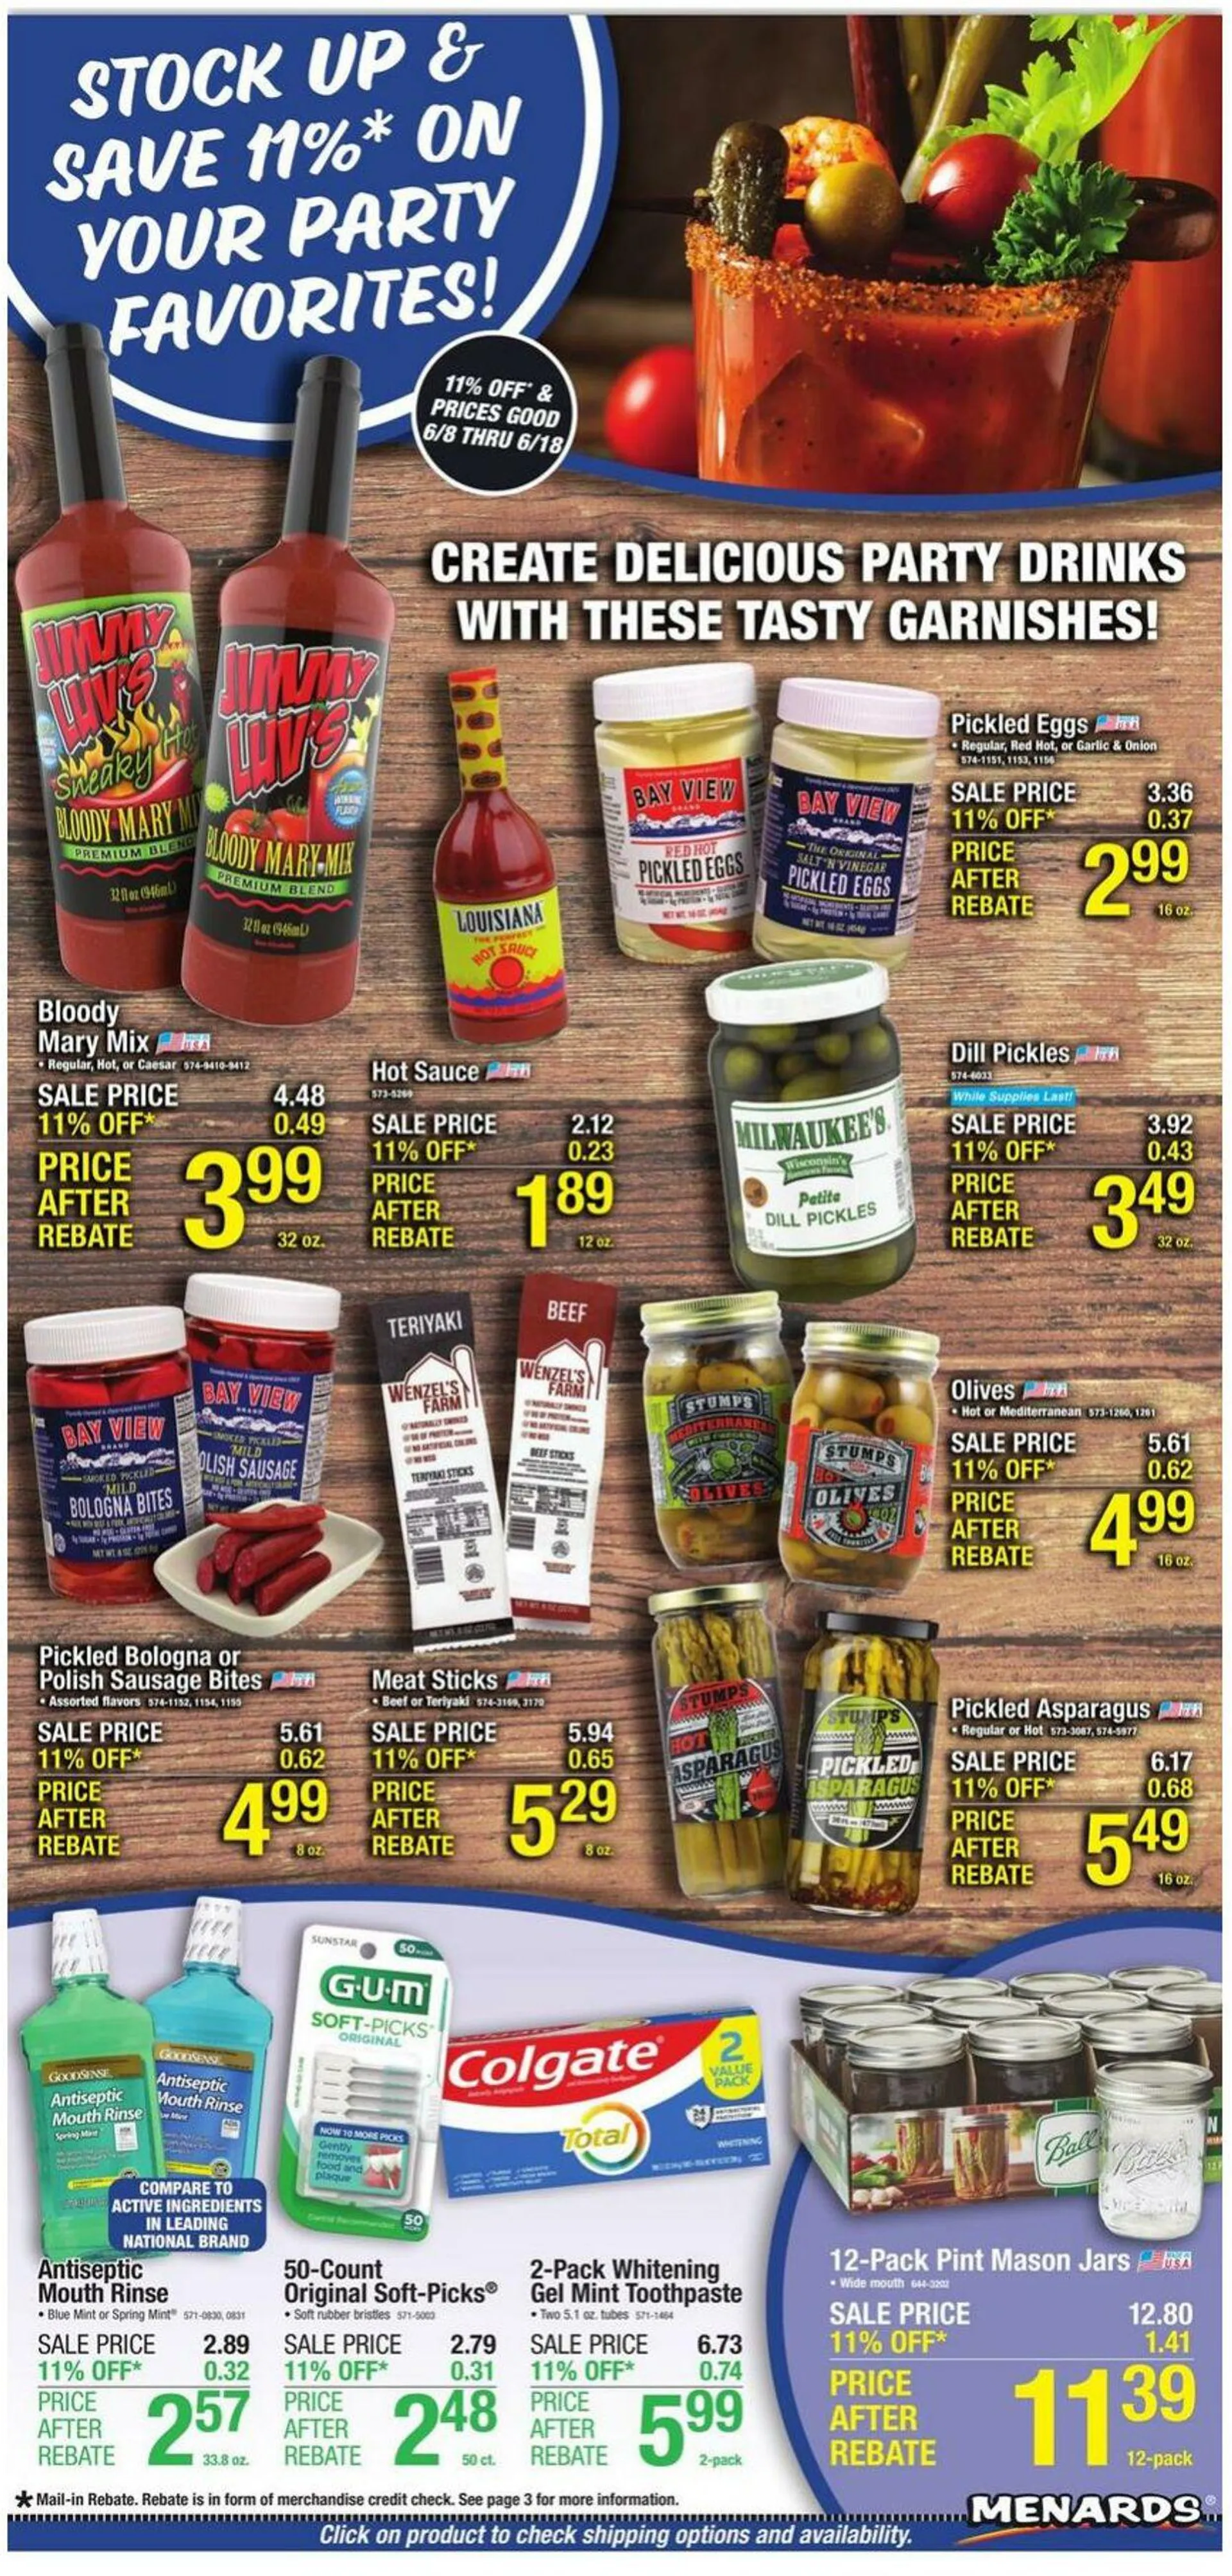 Menards Current weekly ad - 1